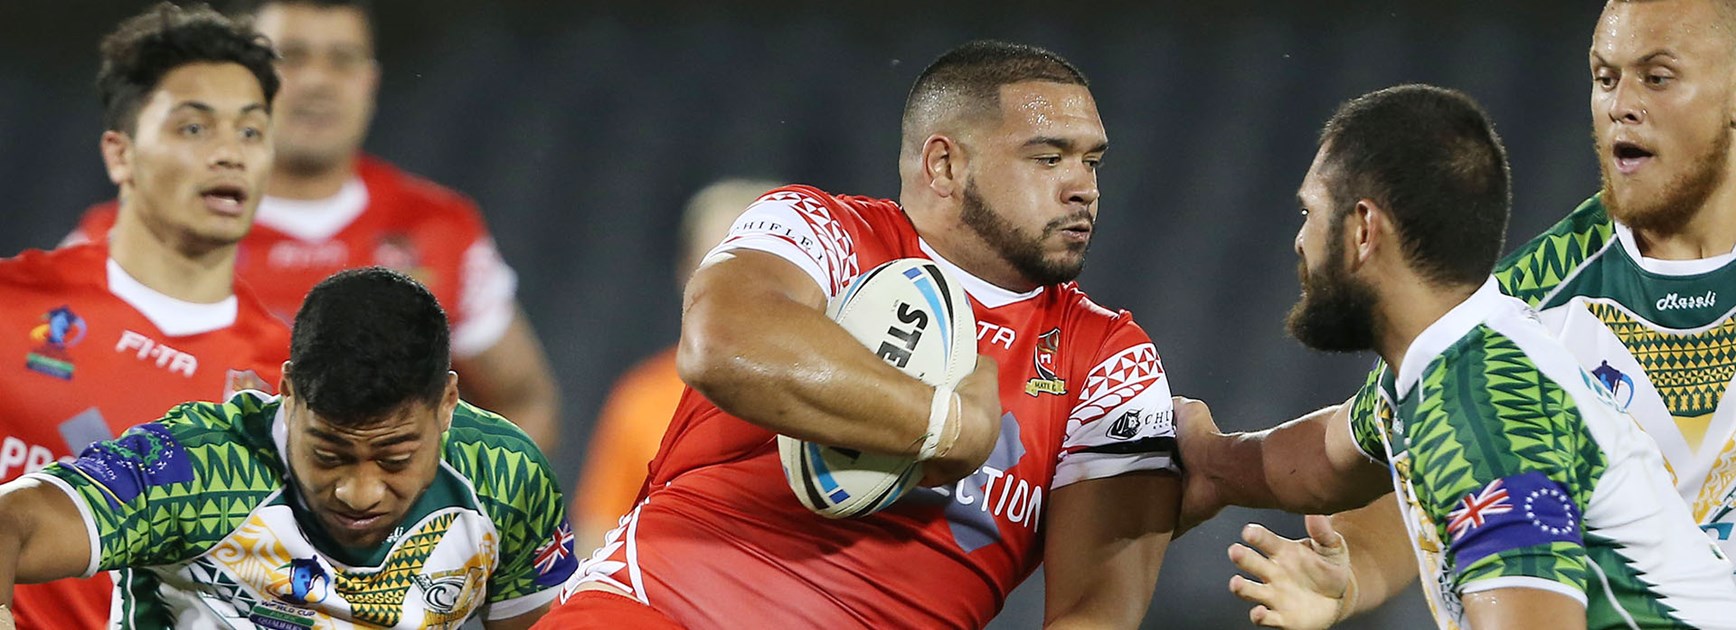 Tongan forward Ben Murdoch-Masila has attracted the attention of NRL clubs with some explosive performances.